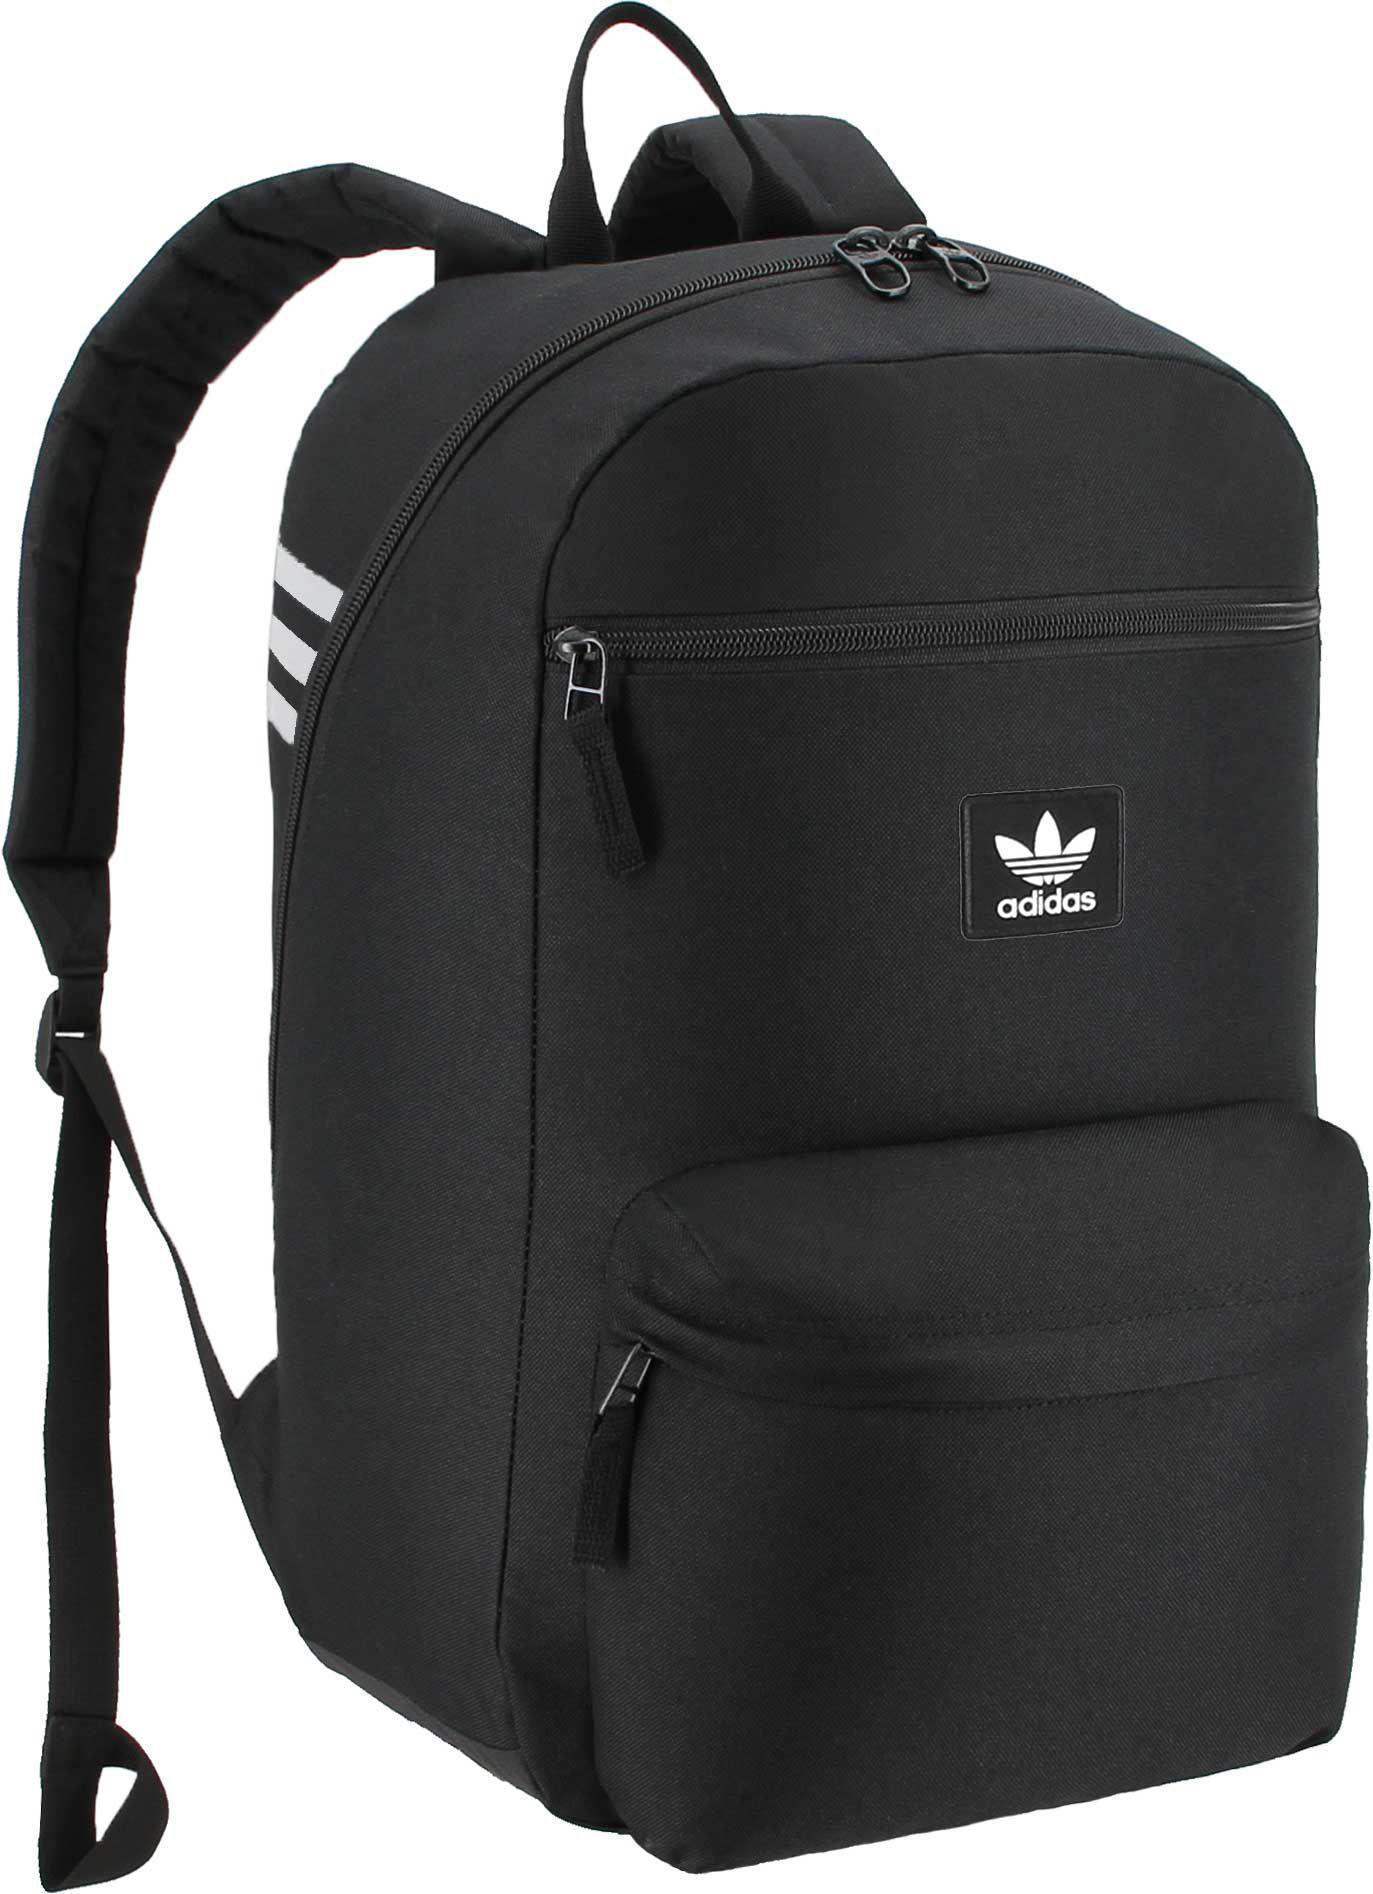 adidas Synthetic Originals National Backpack in Black for Men - Lyst